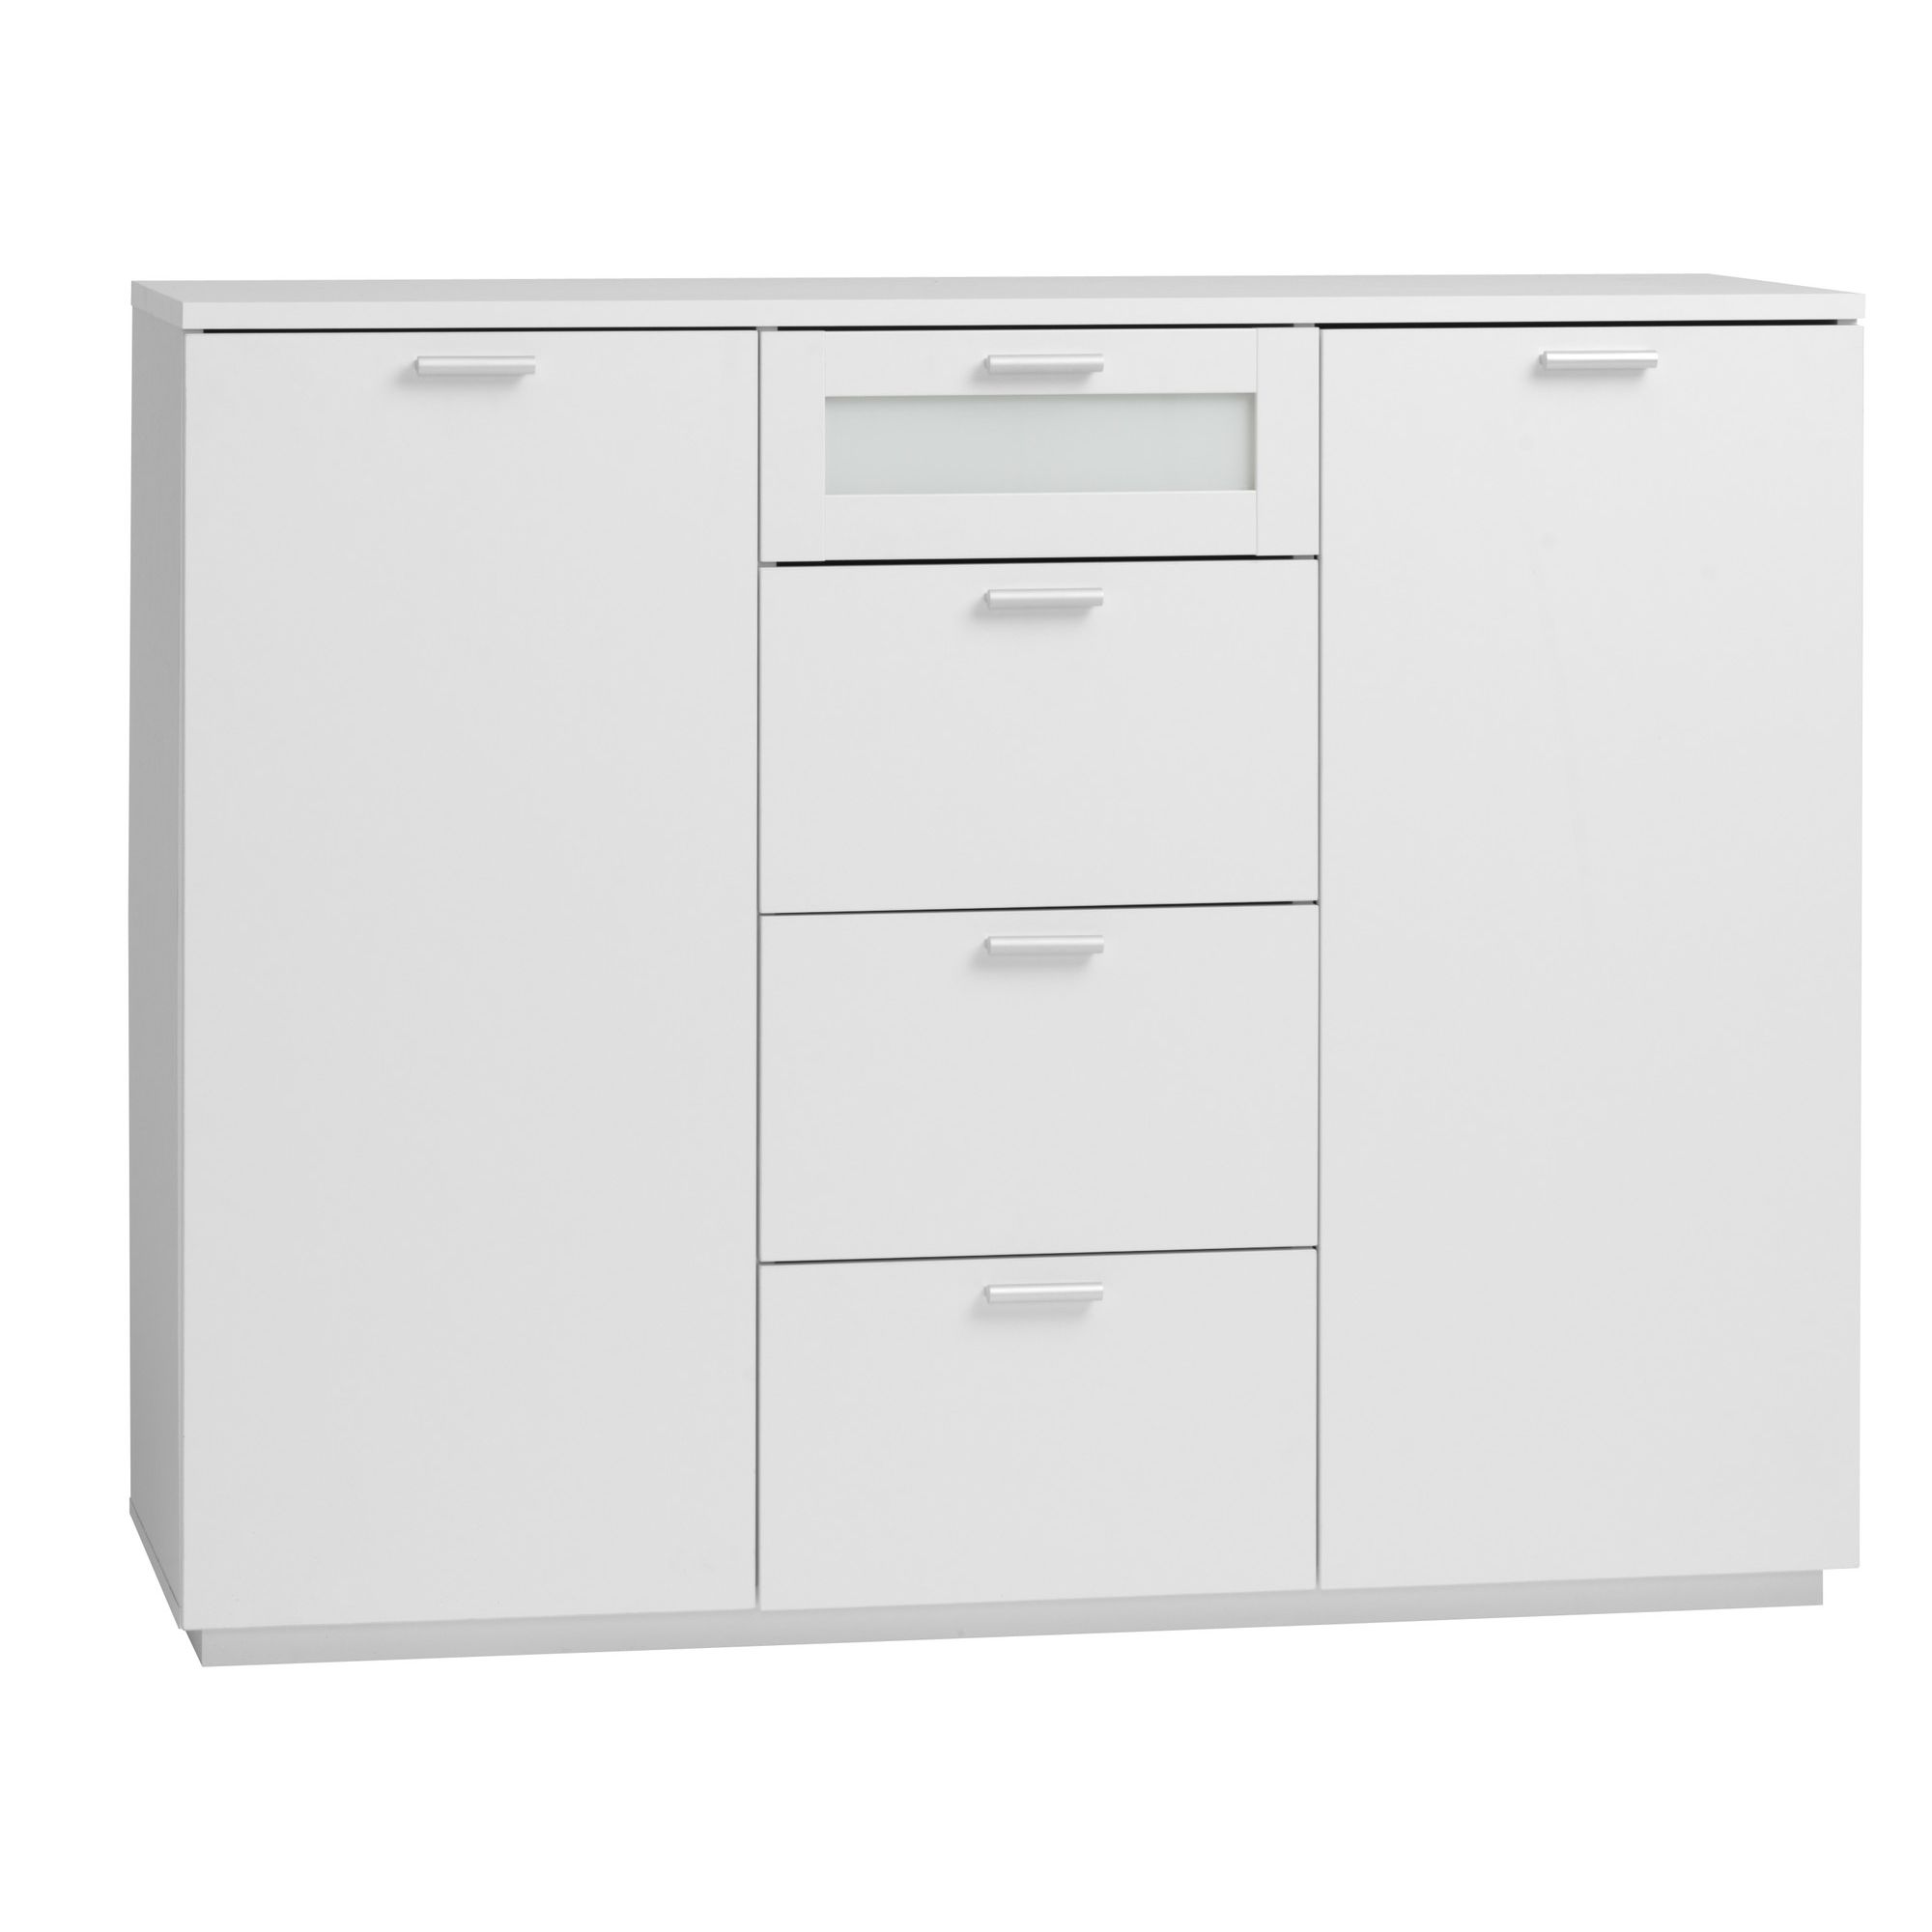 Tvilum New York Sideboard with Two Doors and Four Drawers in White at Tescos Direct